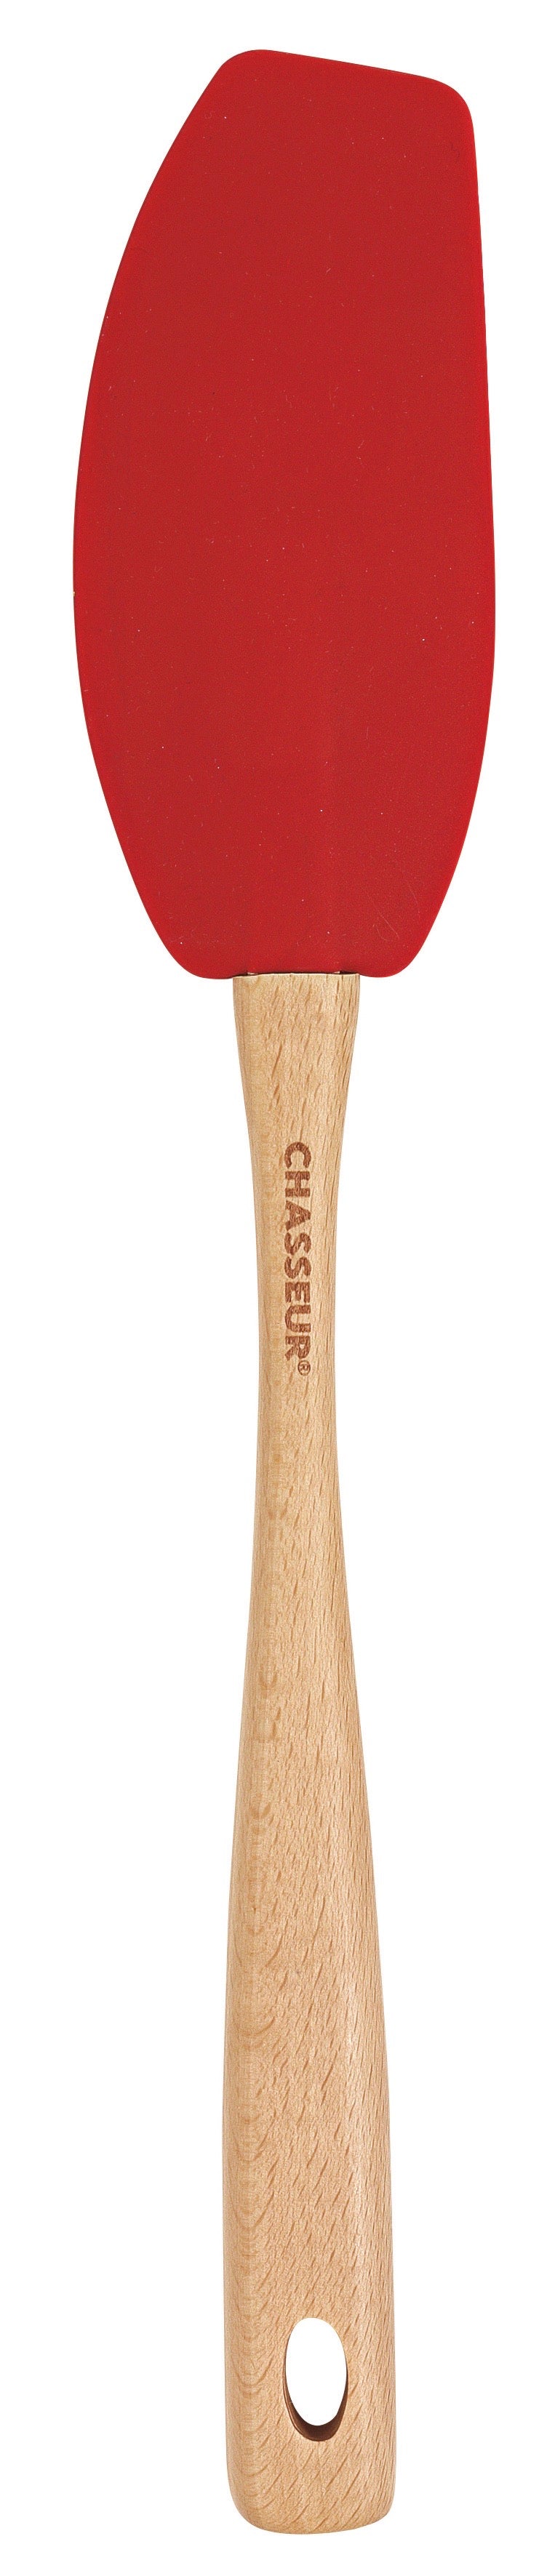 Chasseur Red Silicone Curved Spatula with Wooden Handle